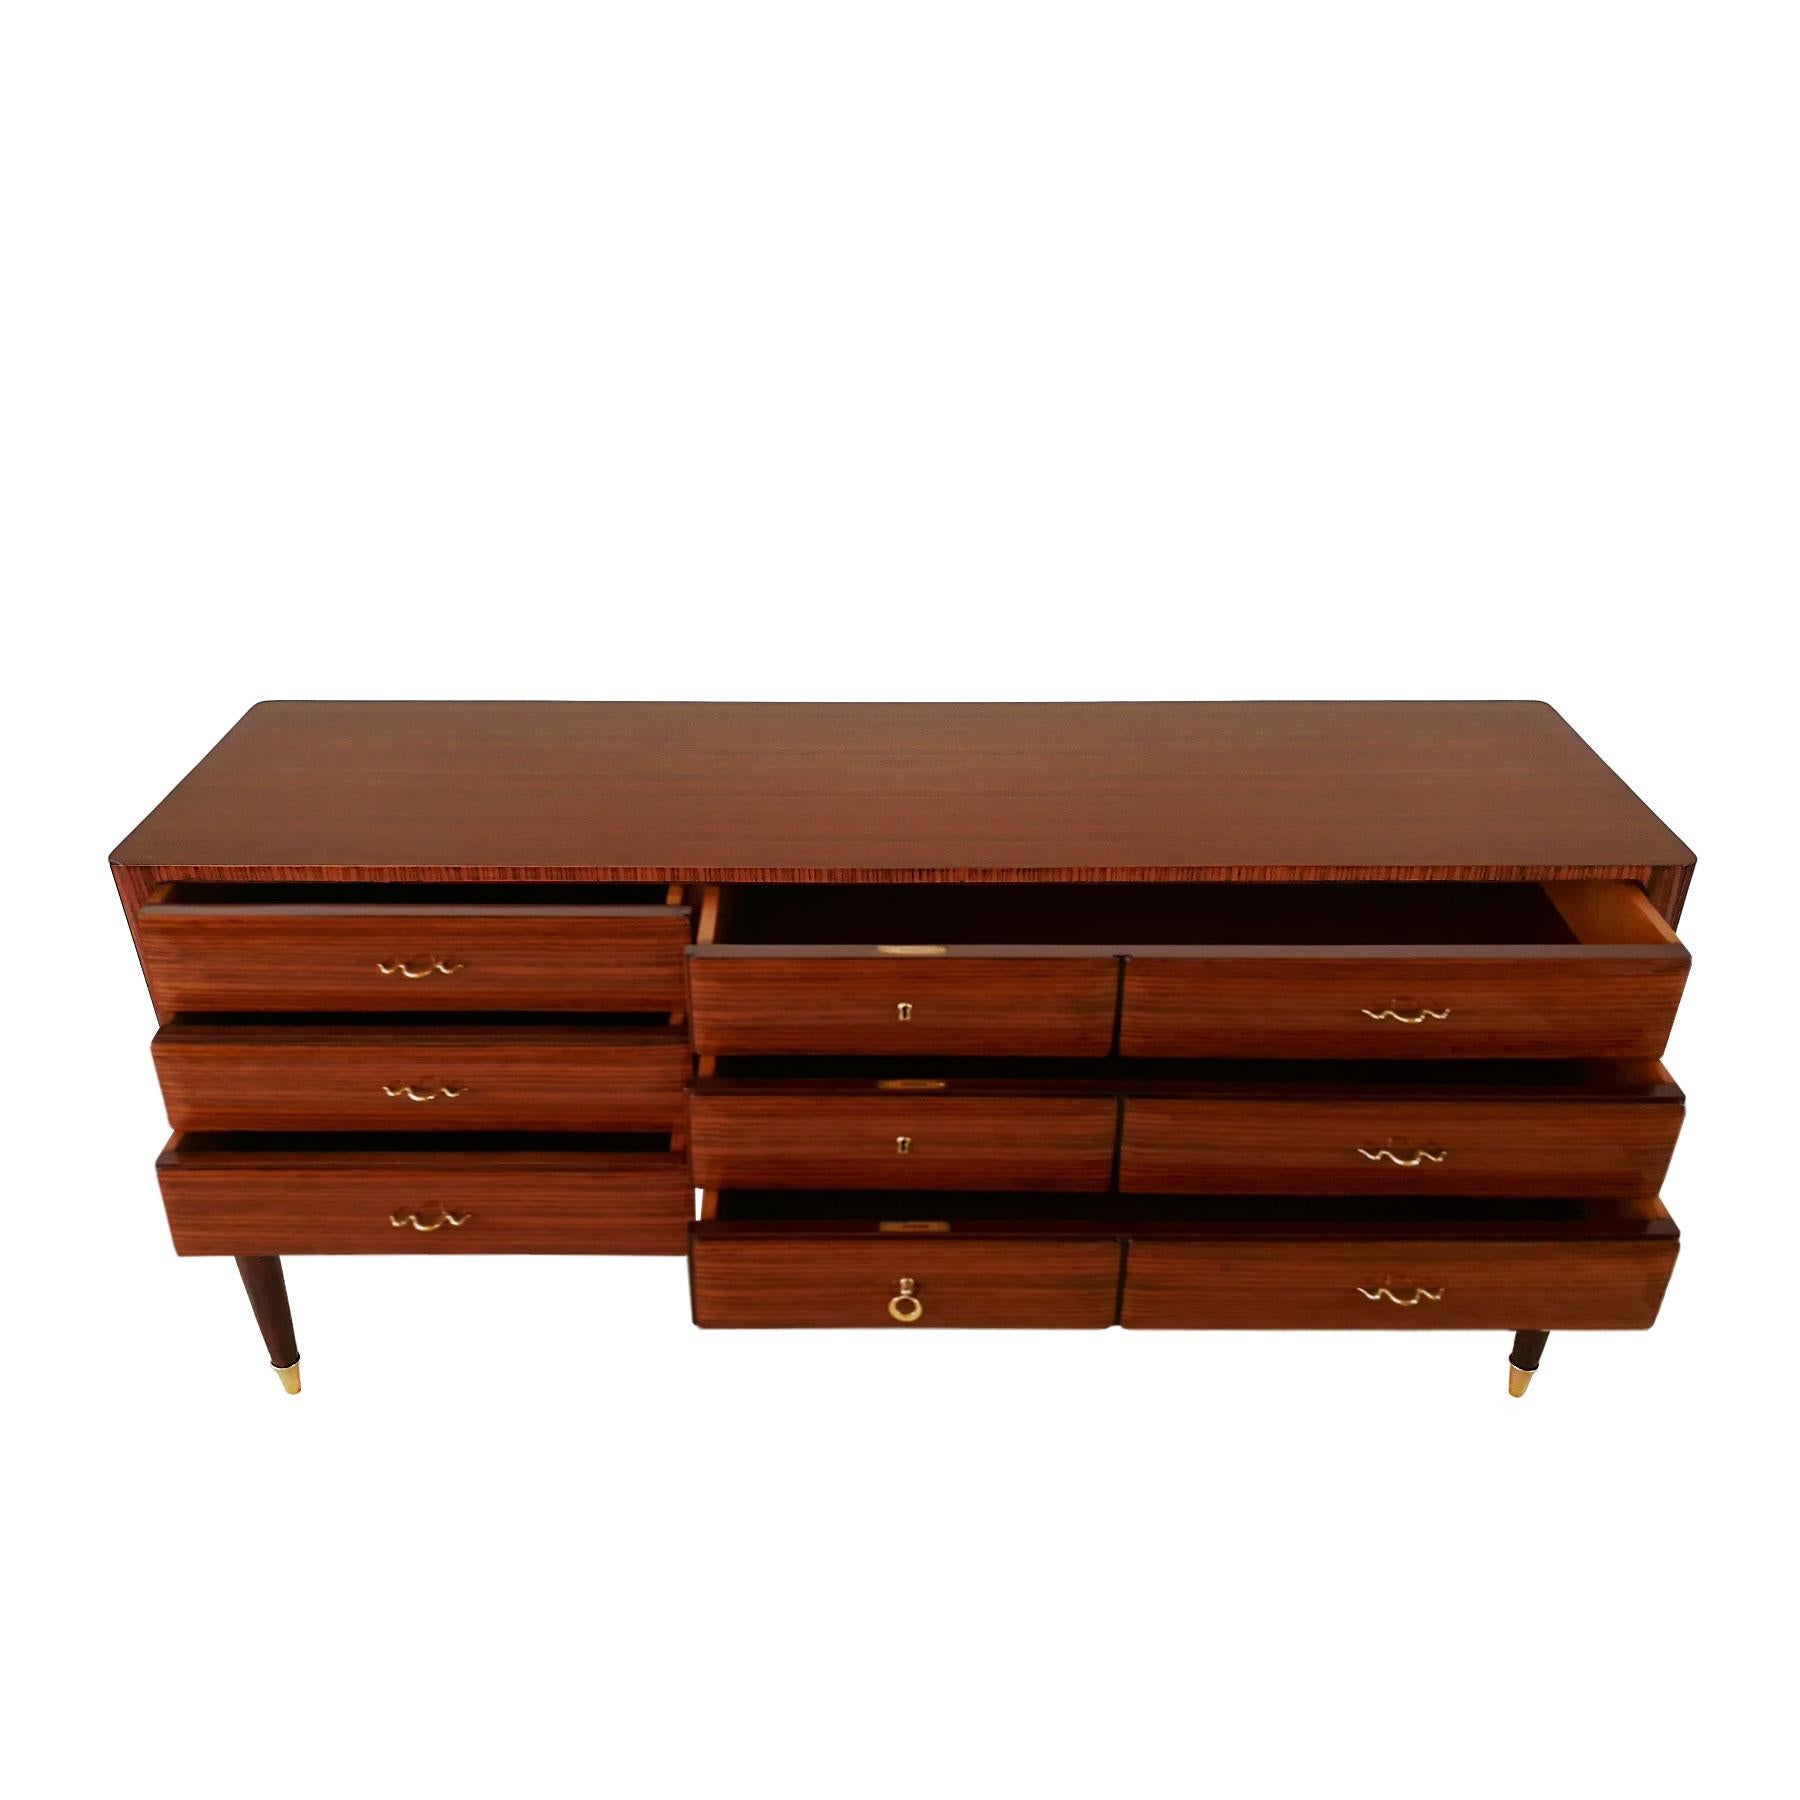 Mid-20th Century Large Mid-Century Modern Commode in Zebra Wood, Mahogany and Brass - Italy For Sale